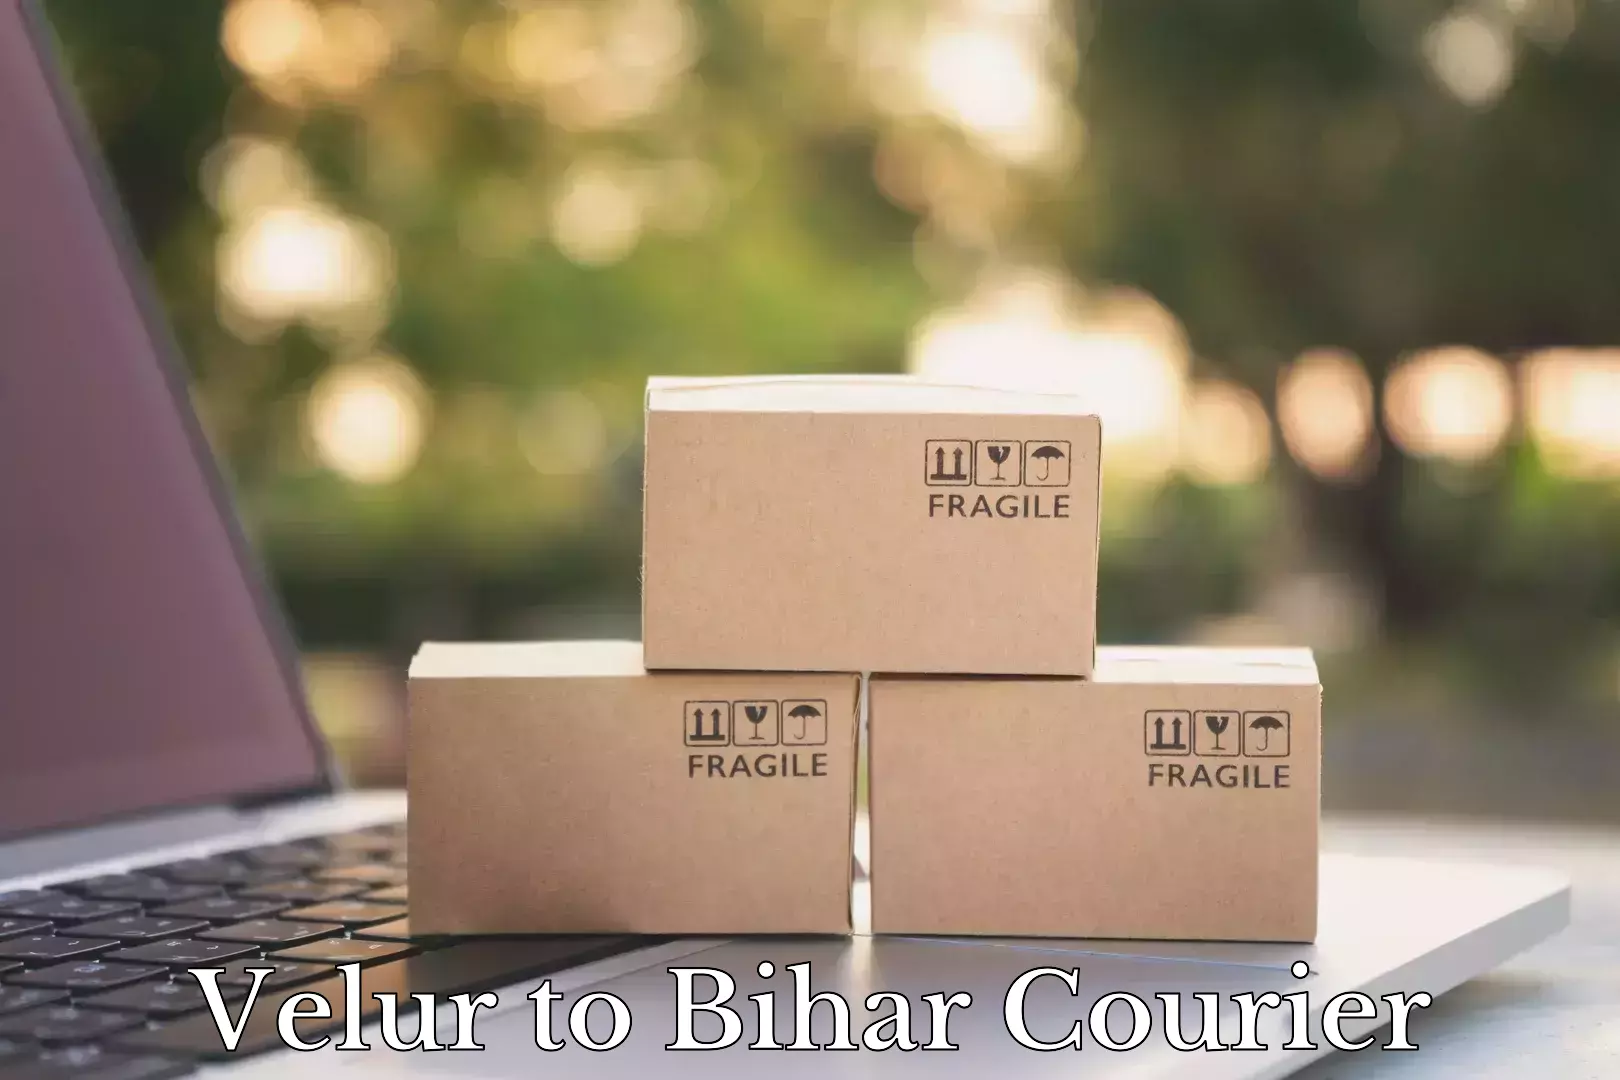 Cost-effective moving options Velur to Buxar